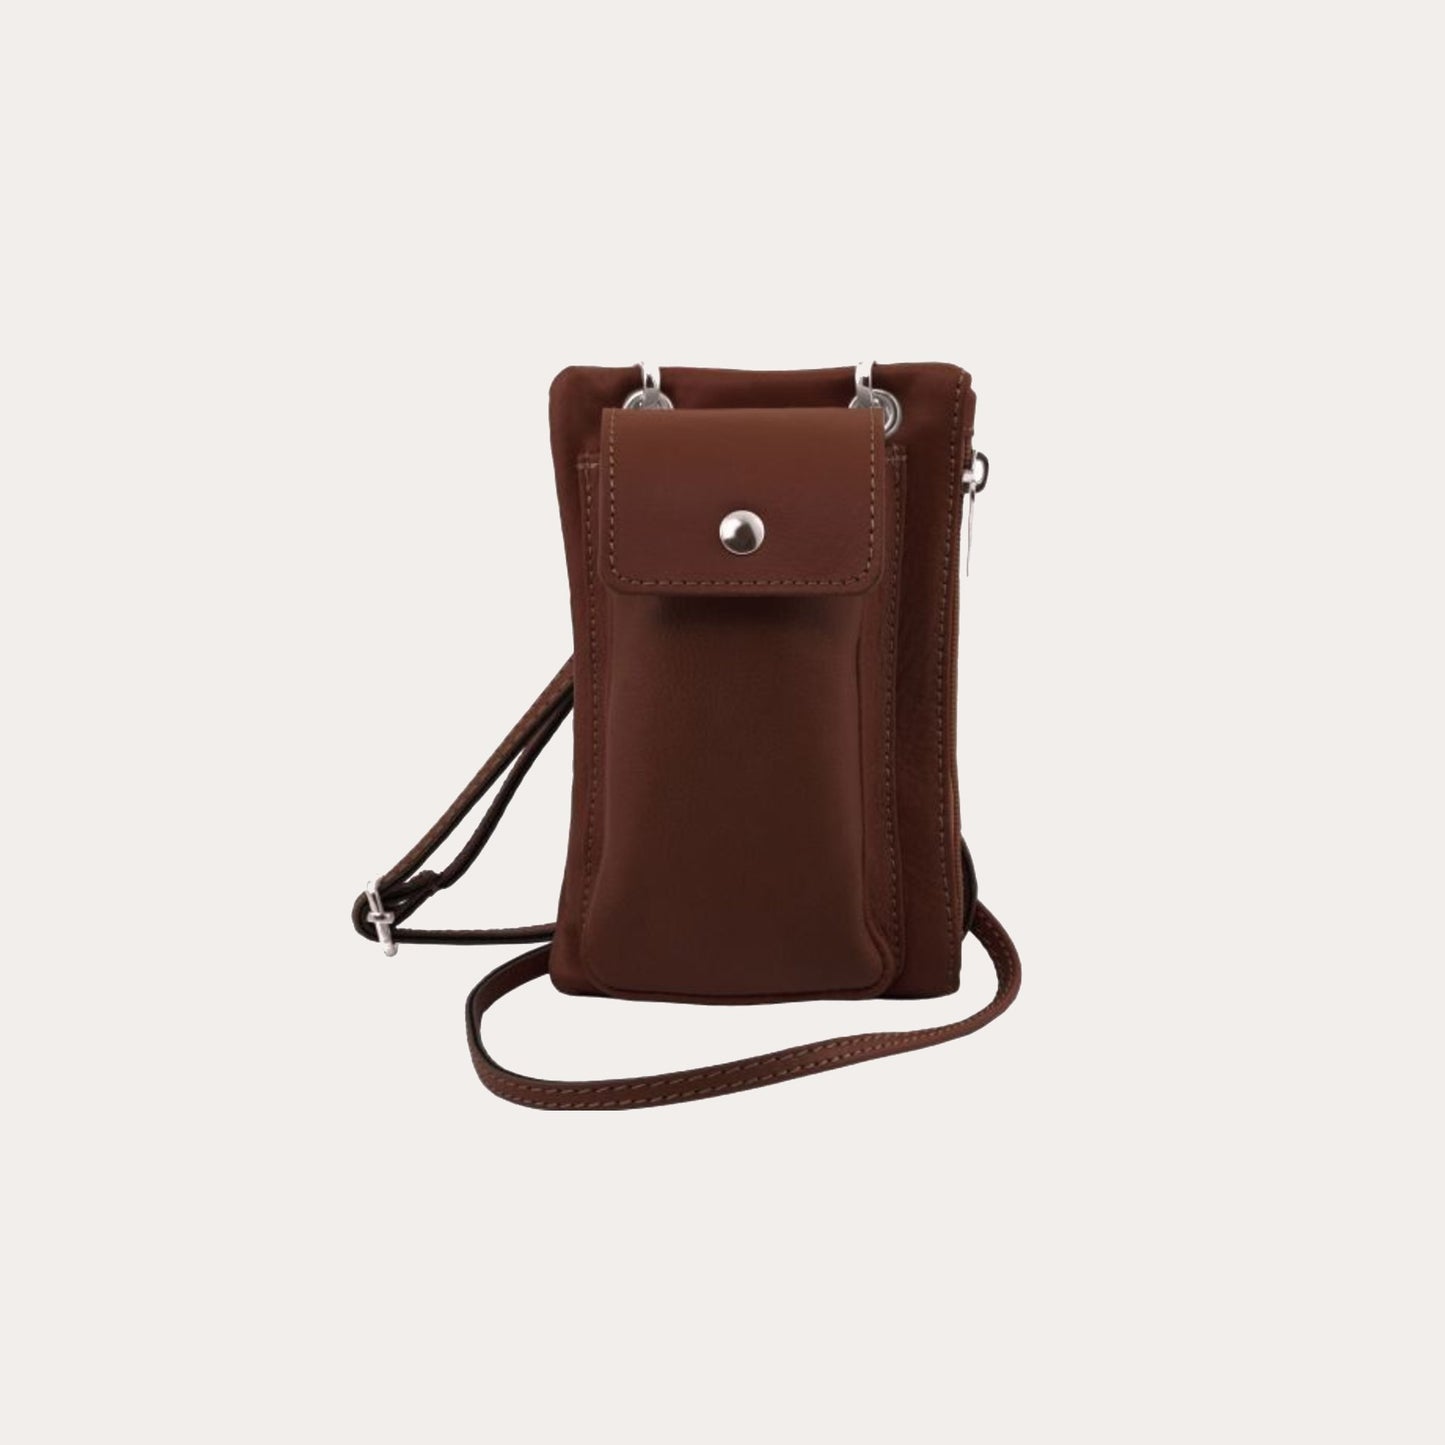 Tuscany Leather Brown Leather Cellphone Holder Mini Cross Bag